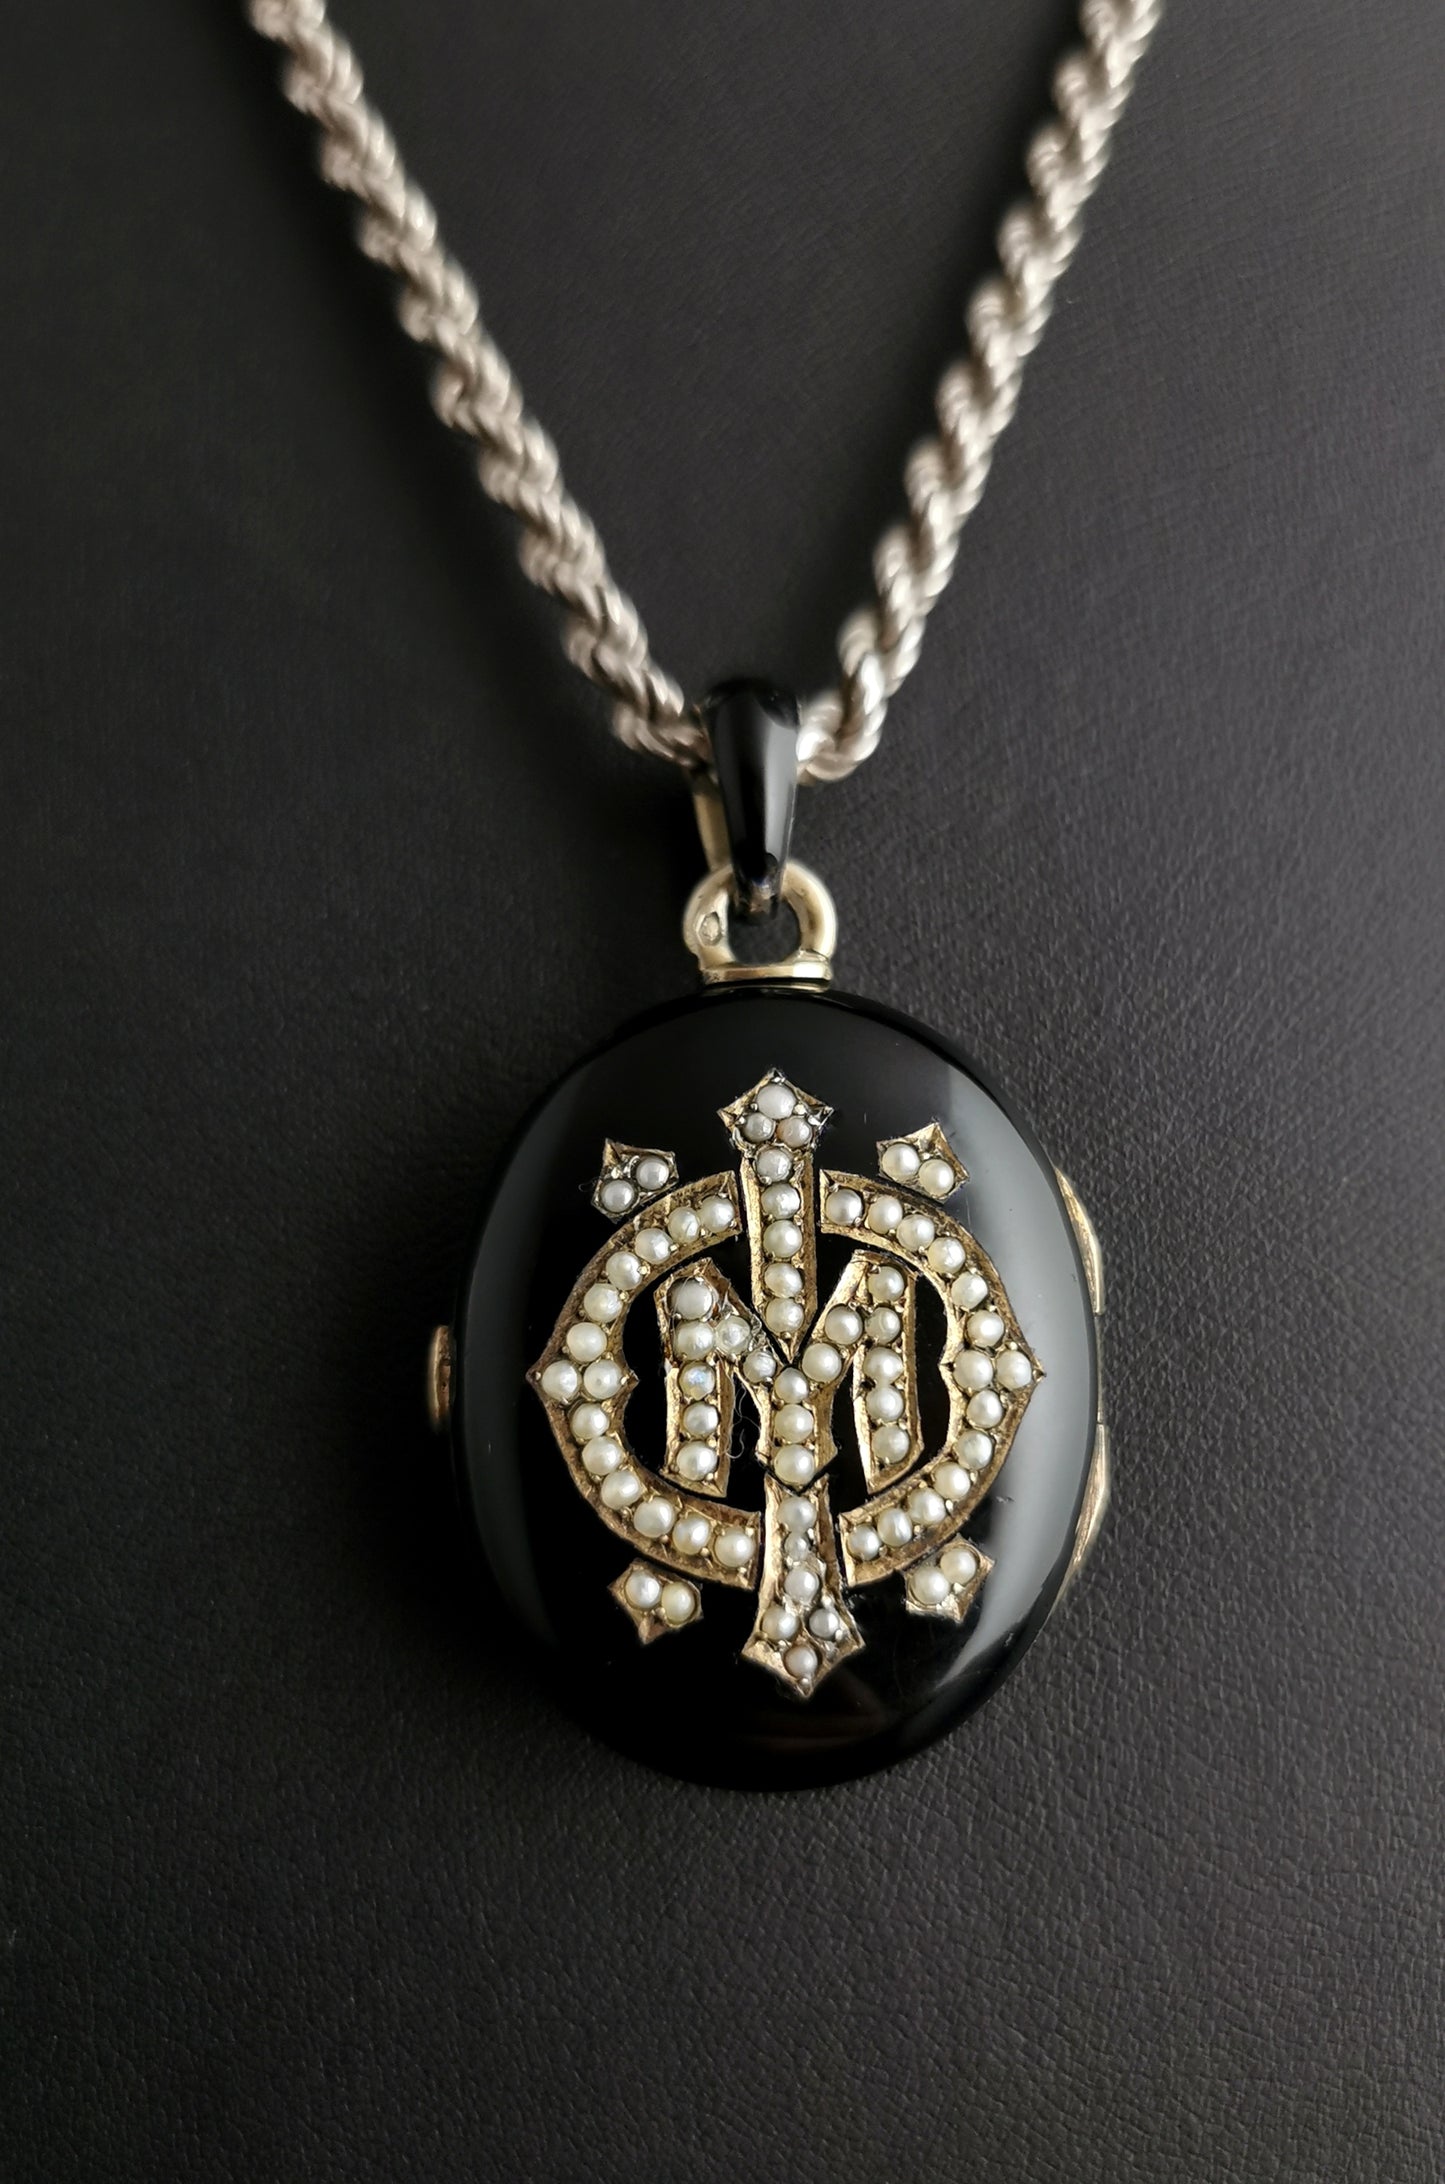 Victorian mourning locket, Black enamel and seed pearl, IMO